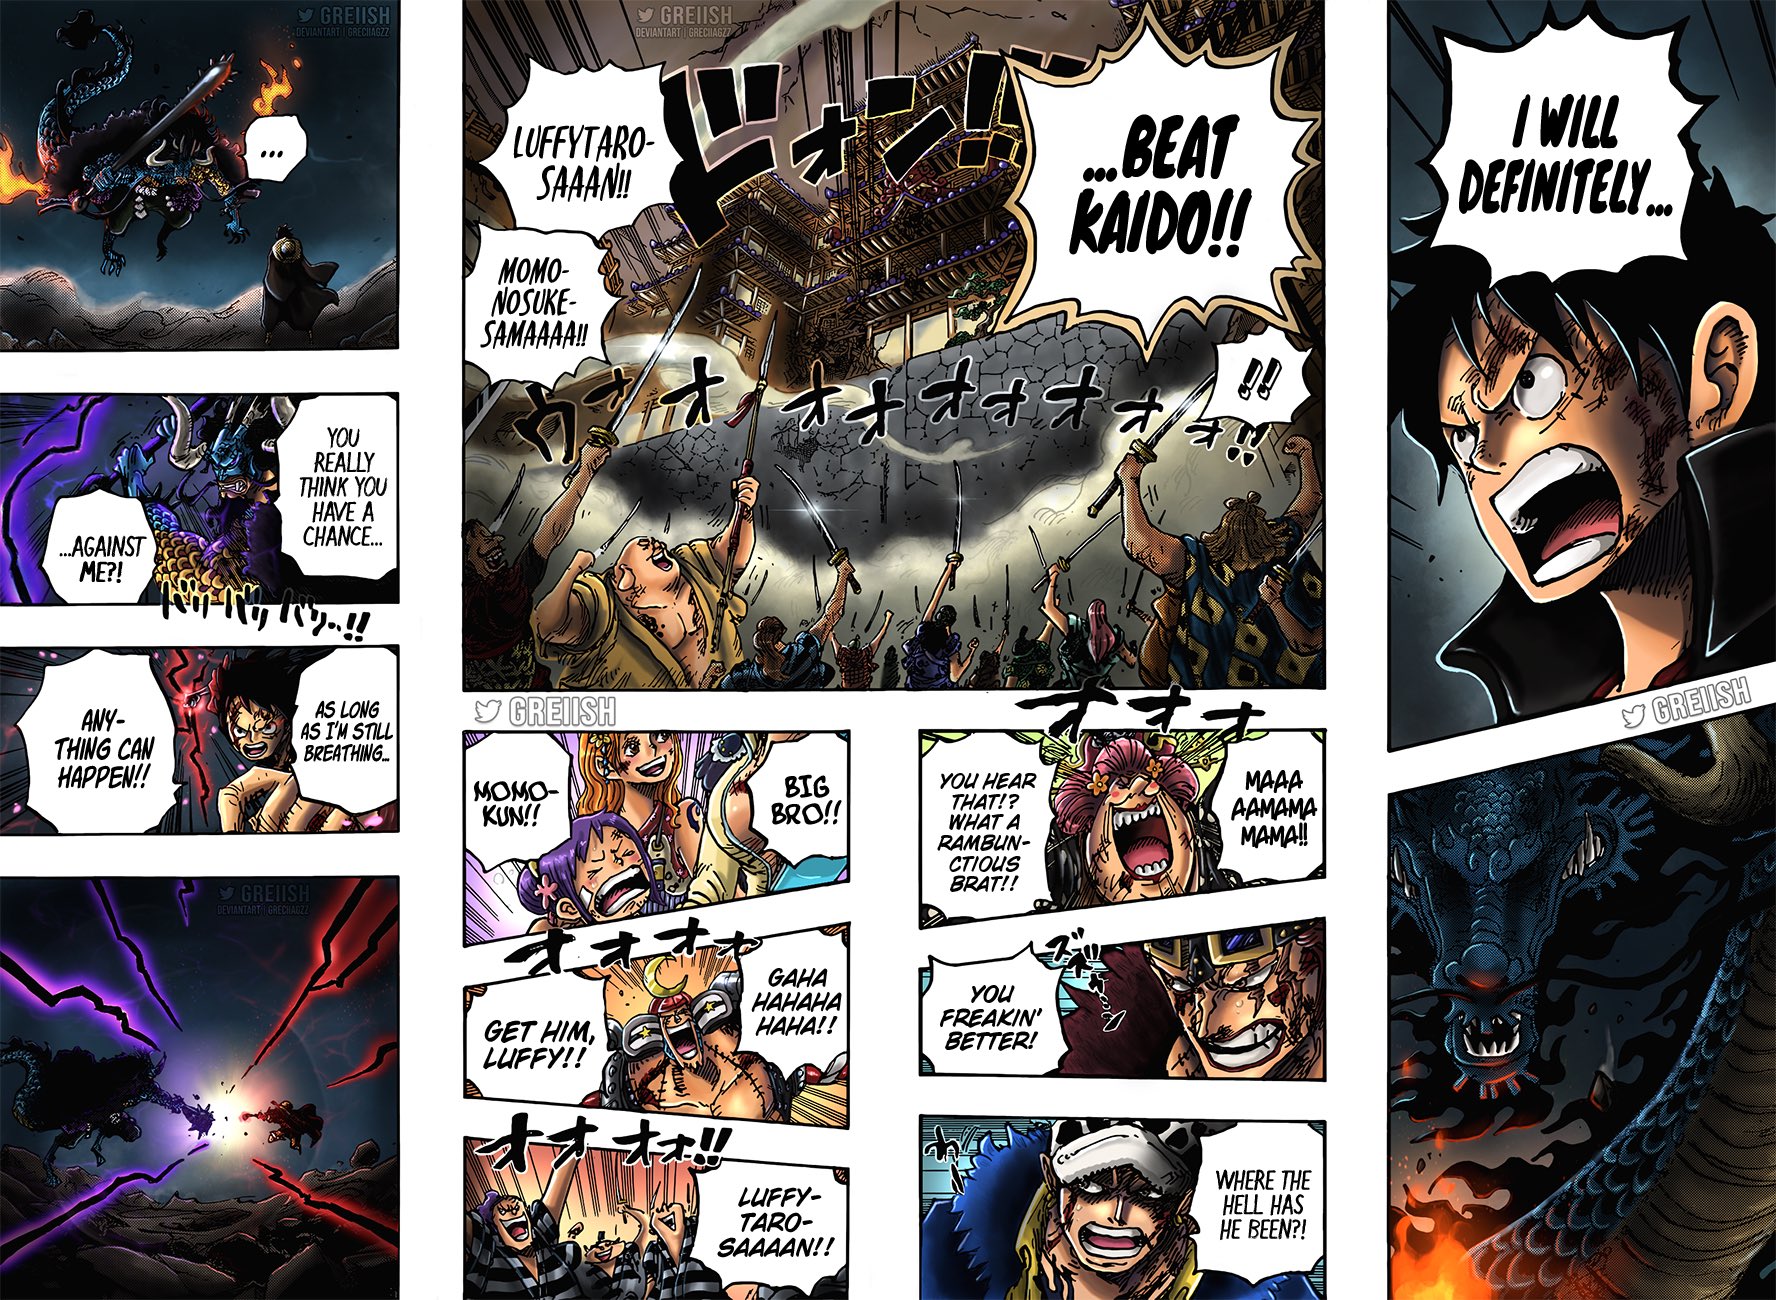 Grecia 💋 on X: “I will definitely beat Kaido!!” Coloring from